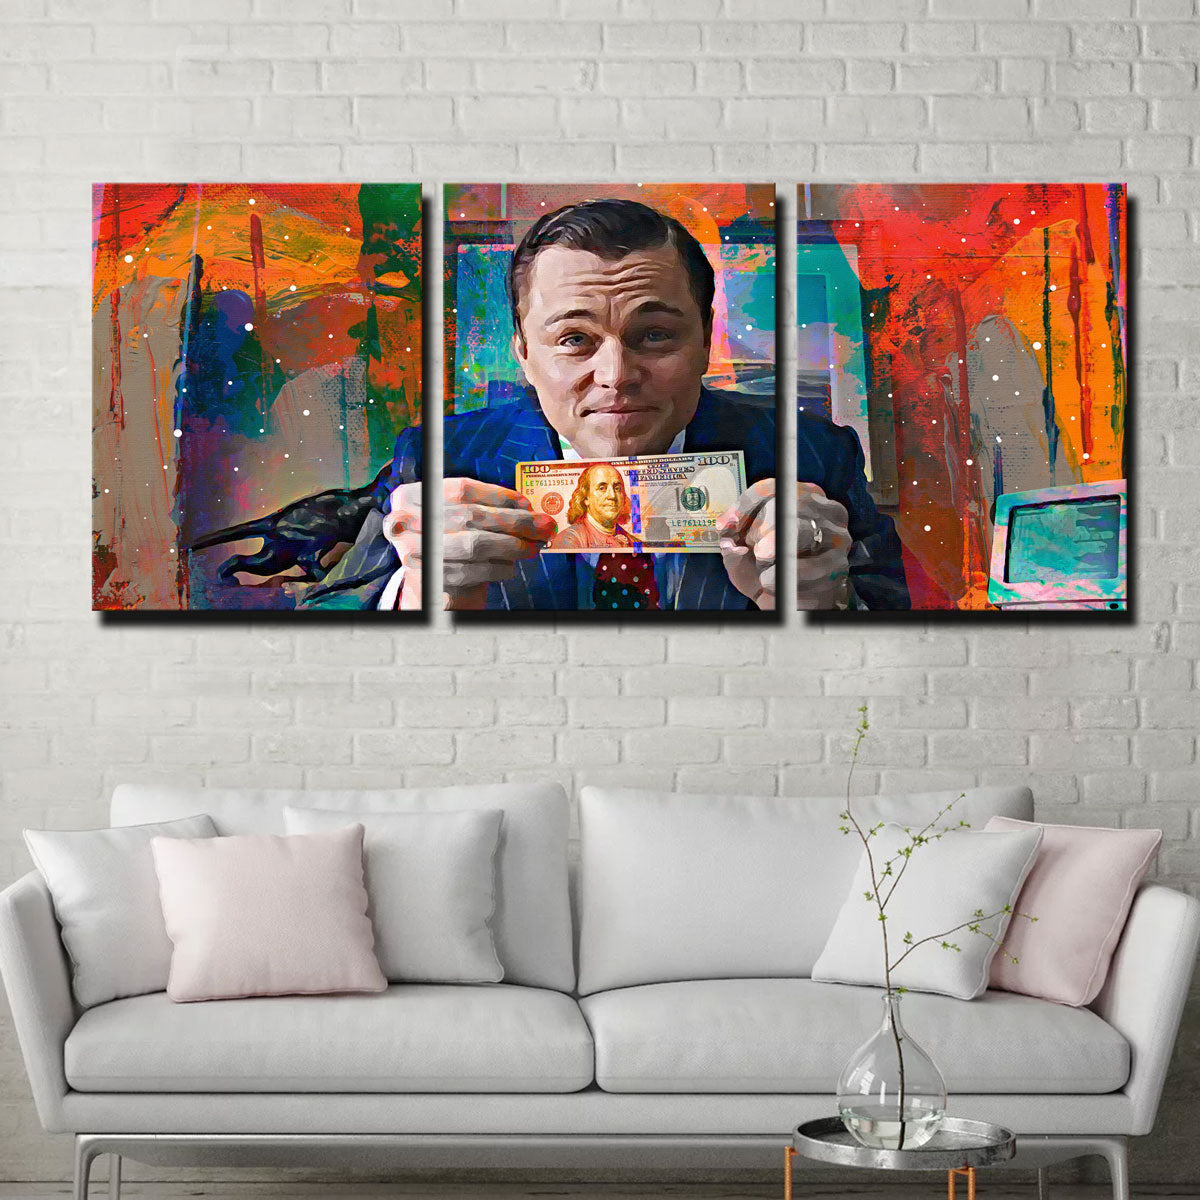 Wolf Of Wall Street Canvas Painting Photo Print Wall Art Fan Home Décor  16x20